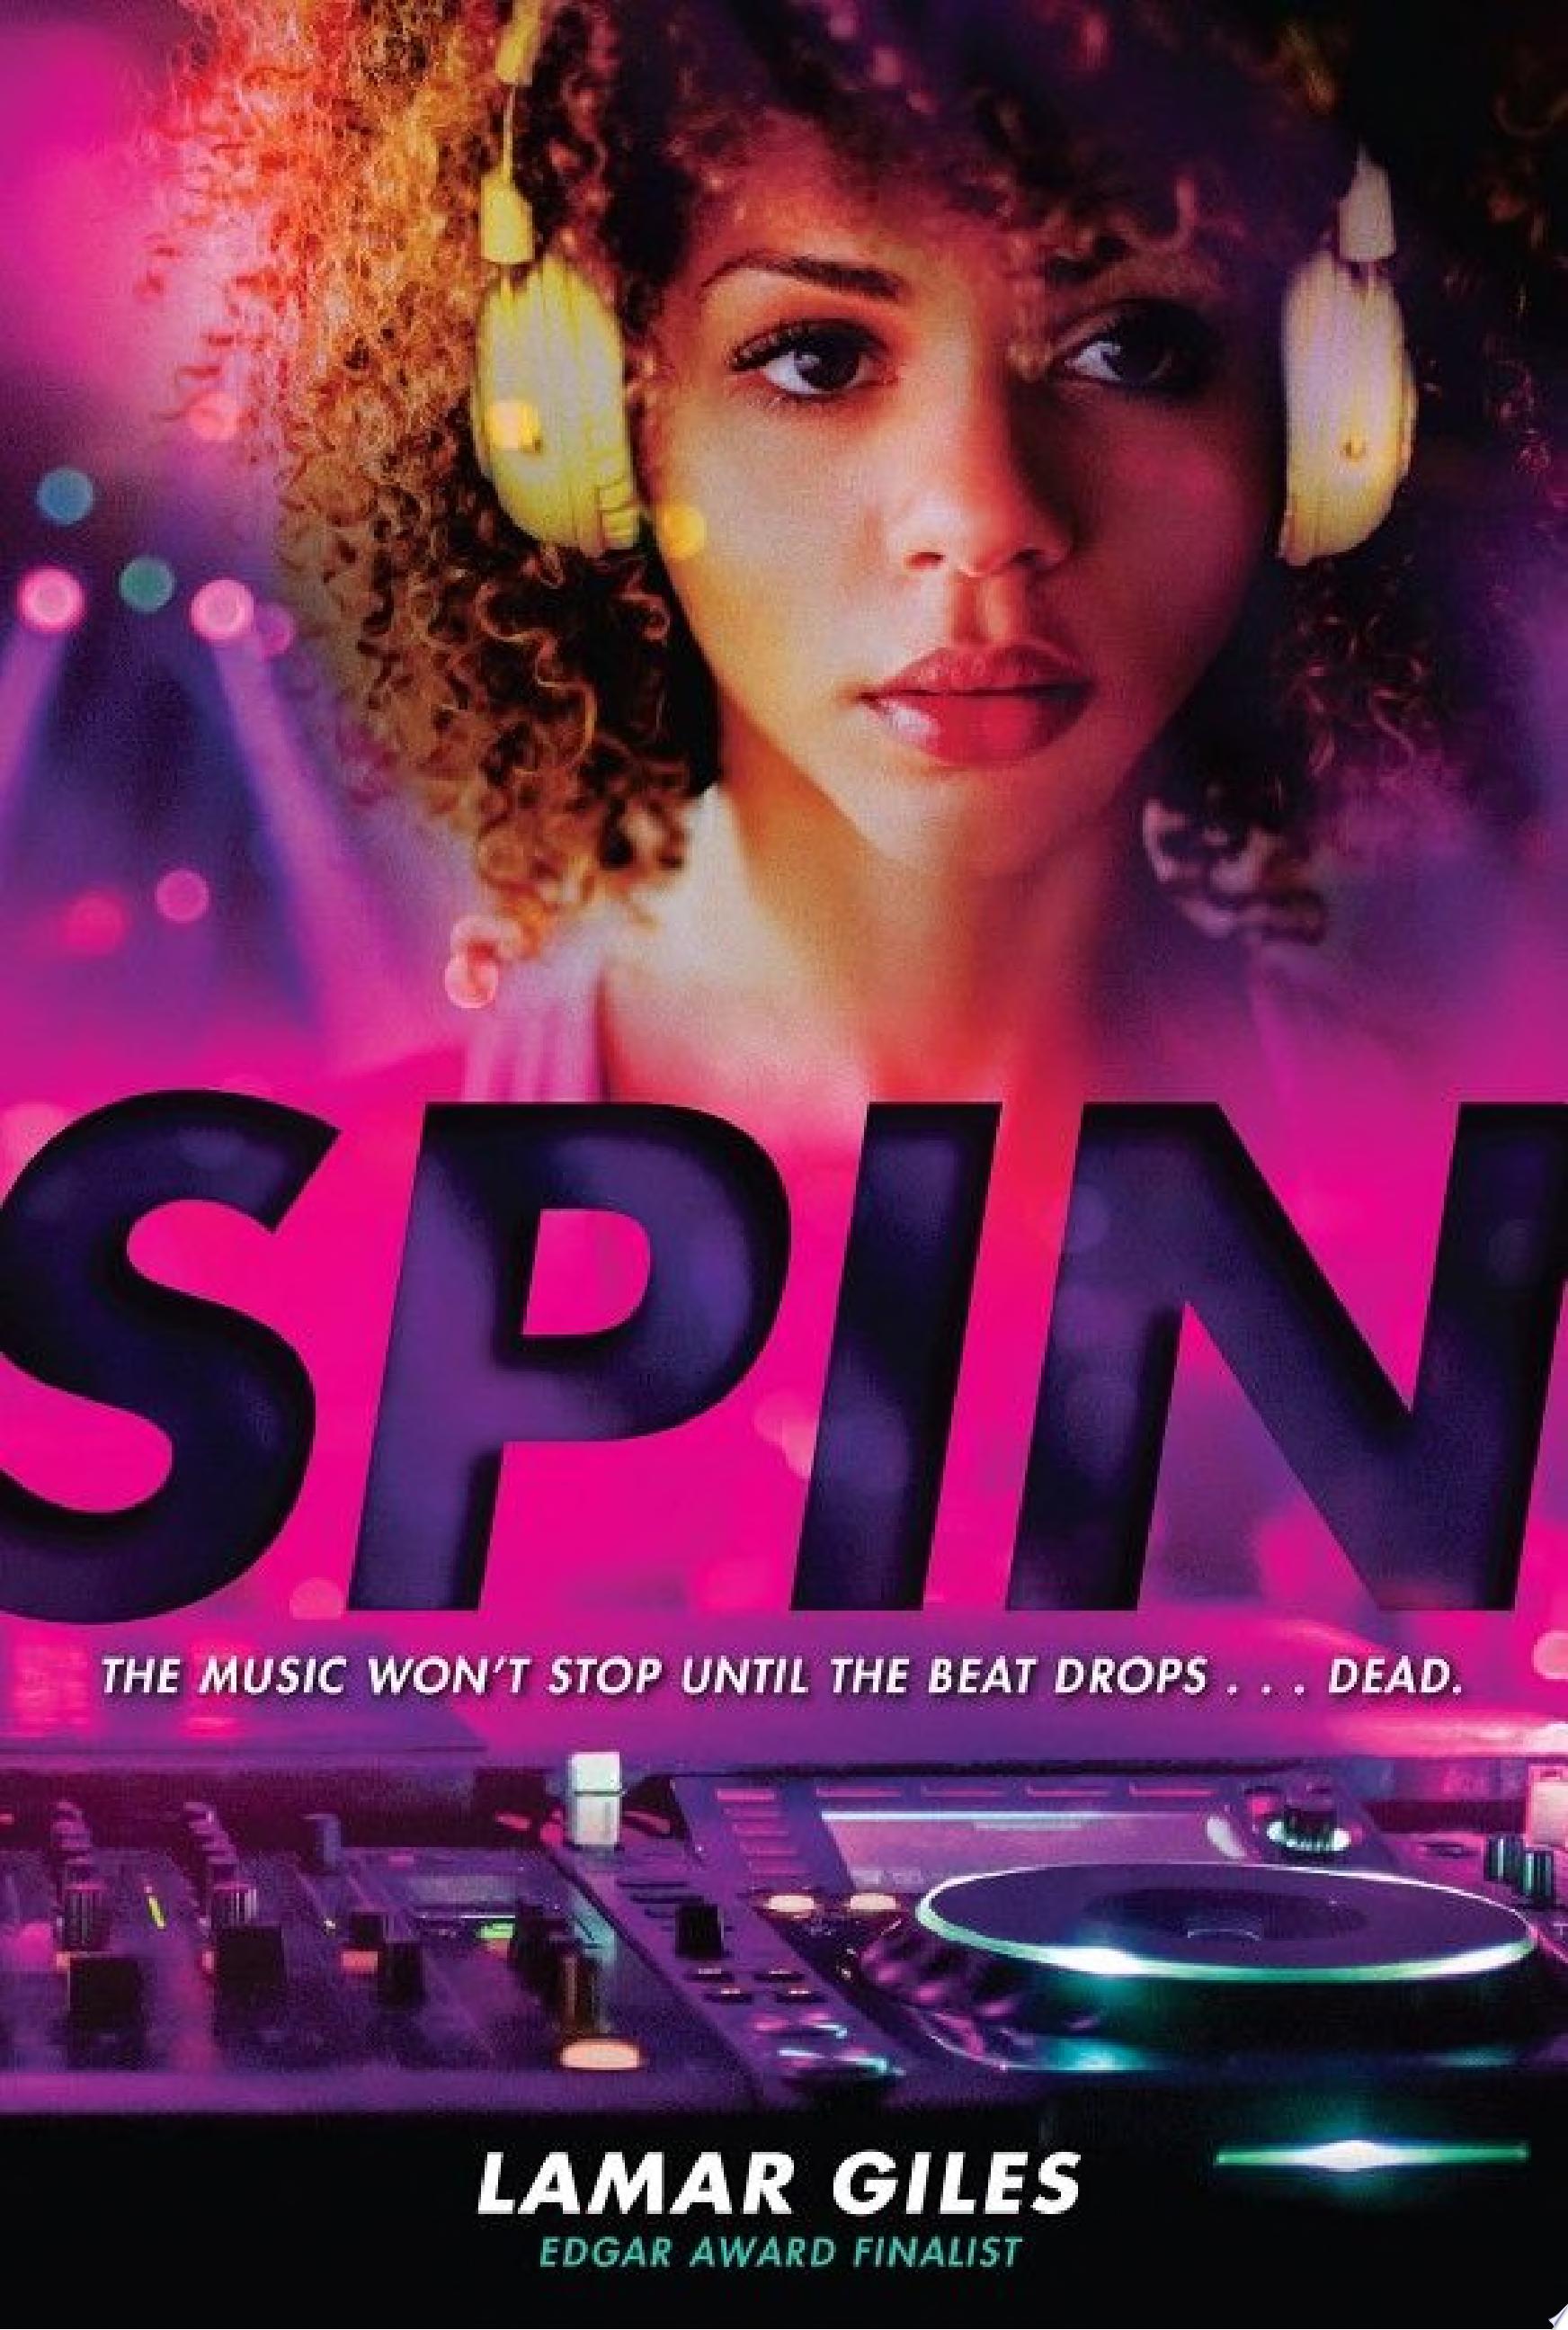 Image for "Spin"